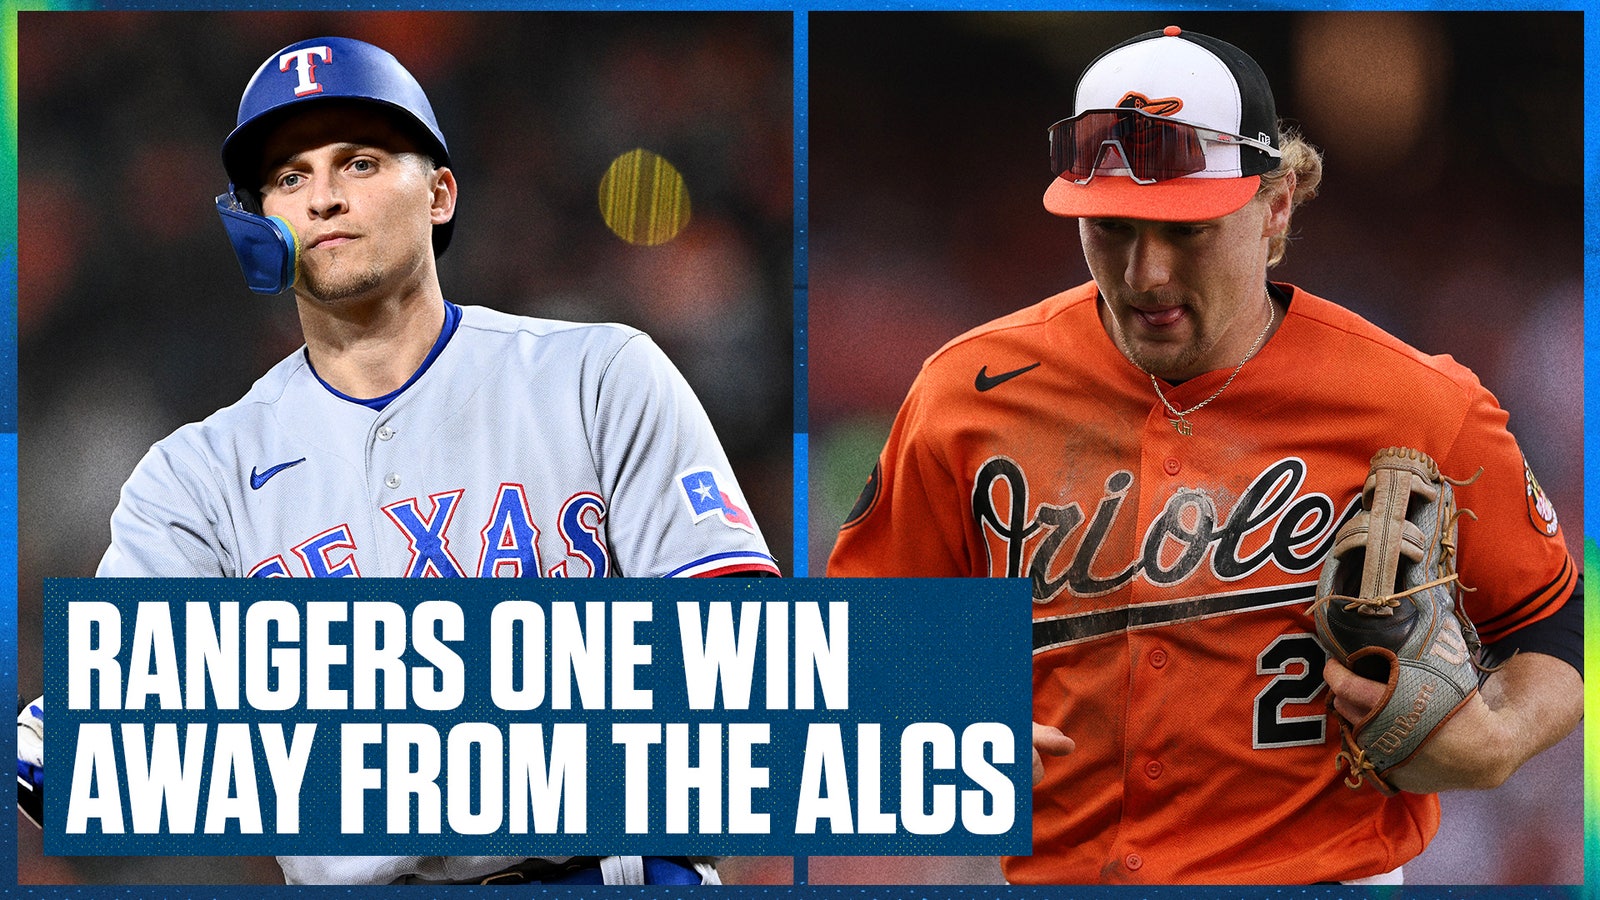 Texas Rangers just one win away from reaching the ALCS